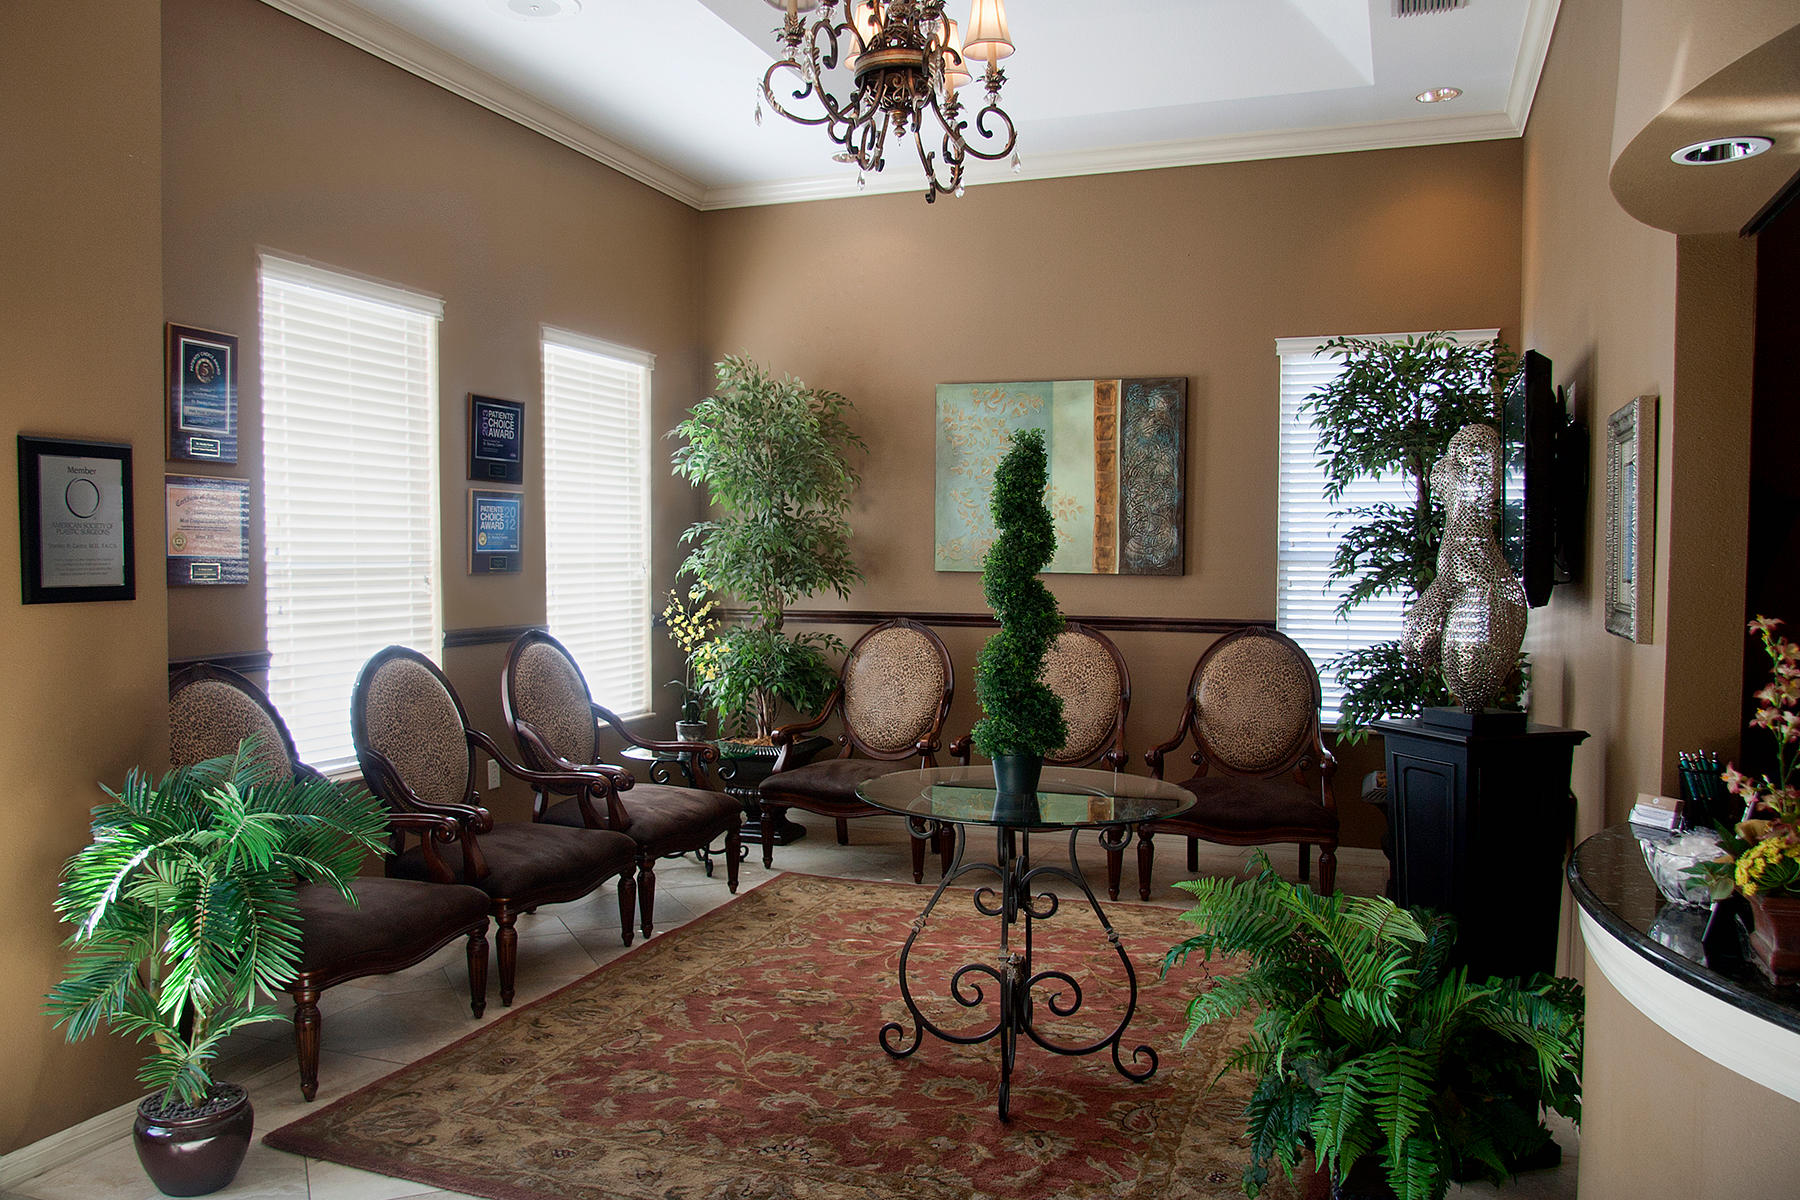 The lobby of Artisan Aesthetics Plastic Surgery & Laser Center located in Tampa, Florida